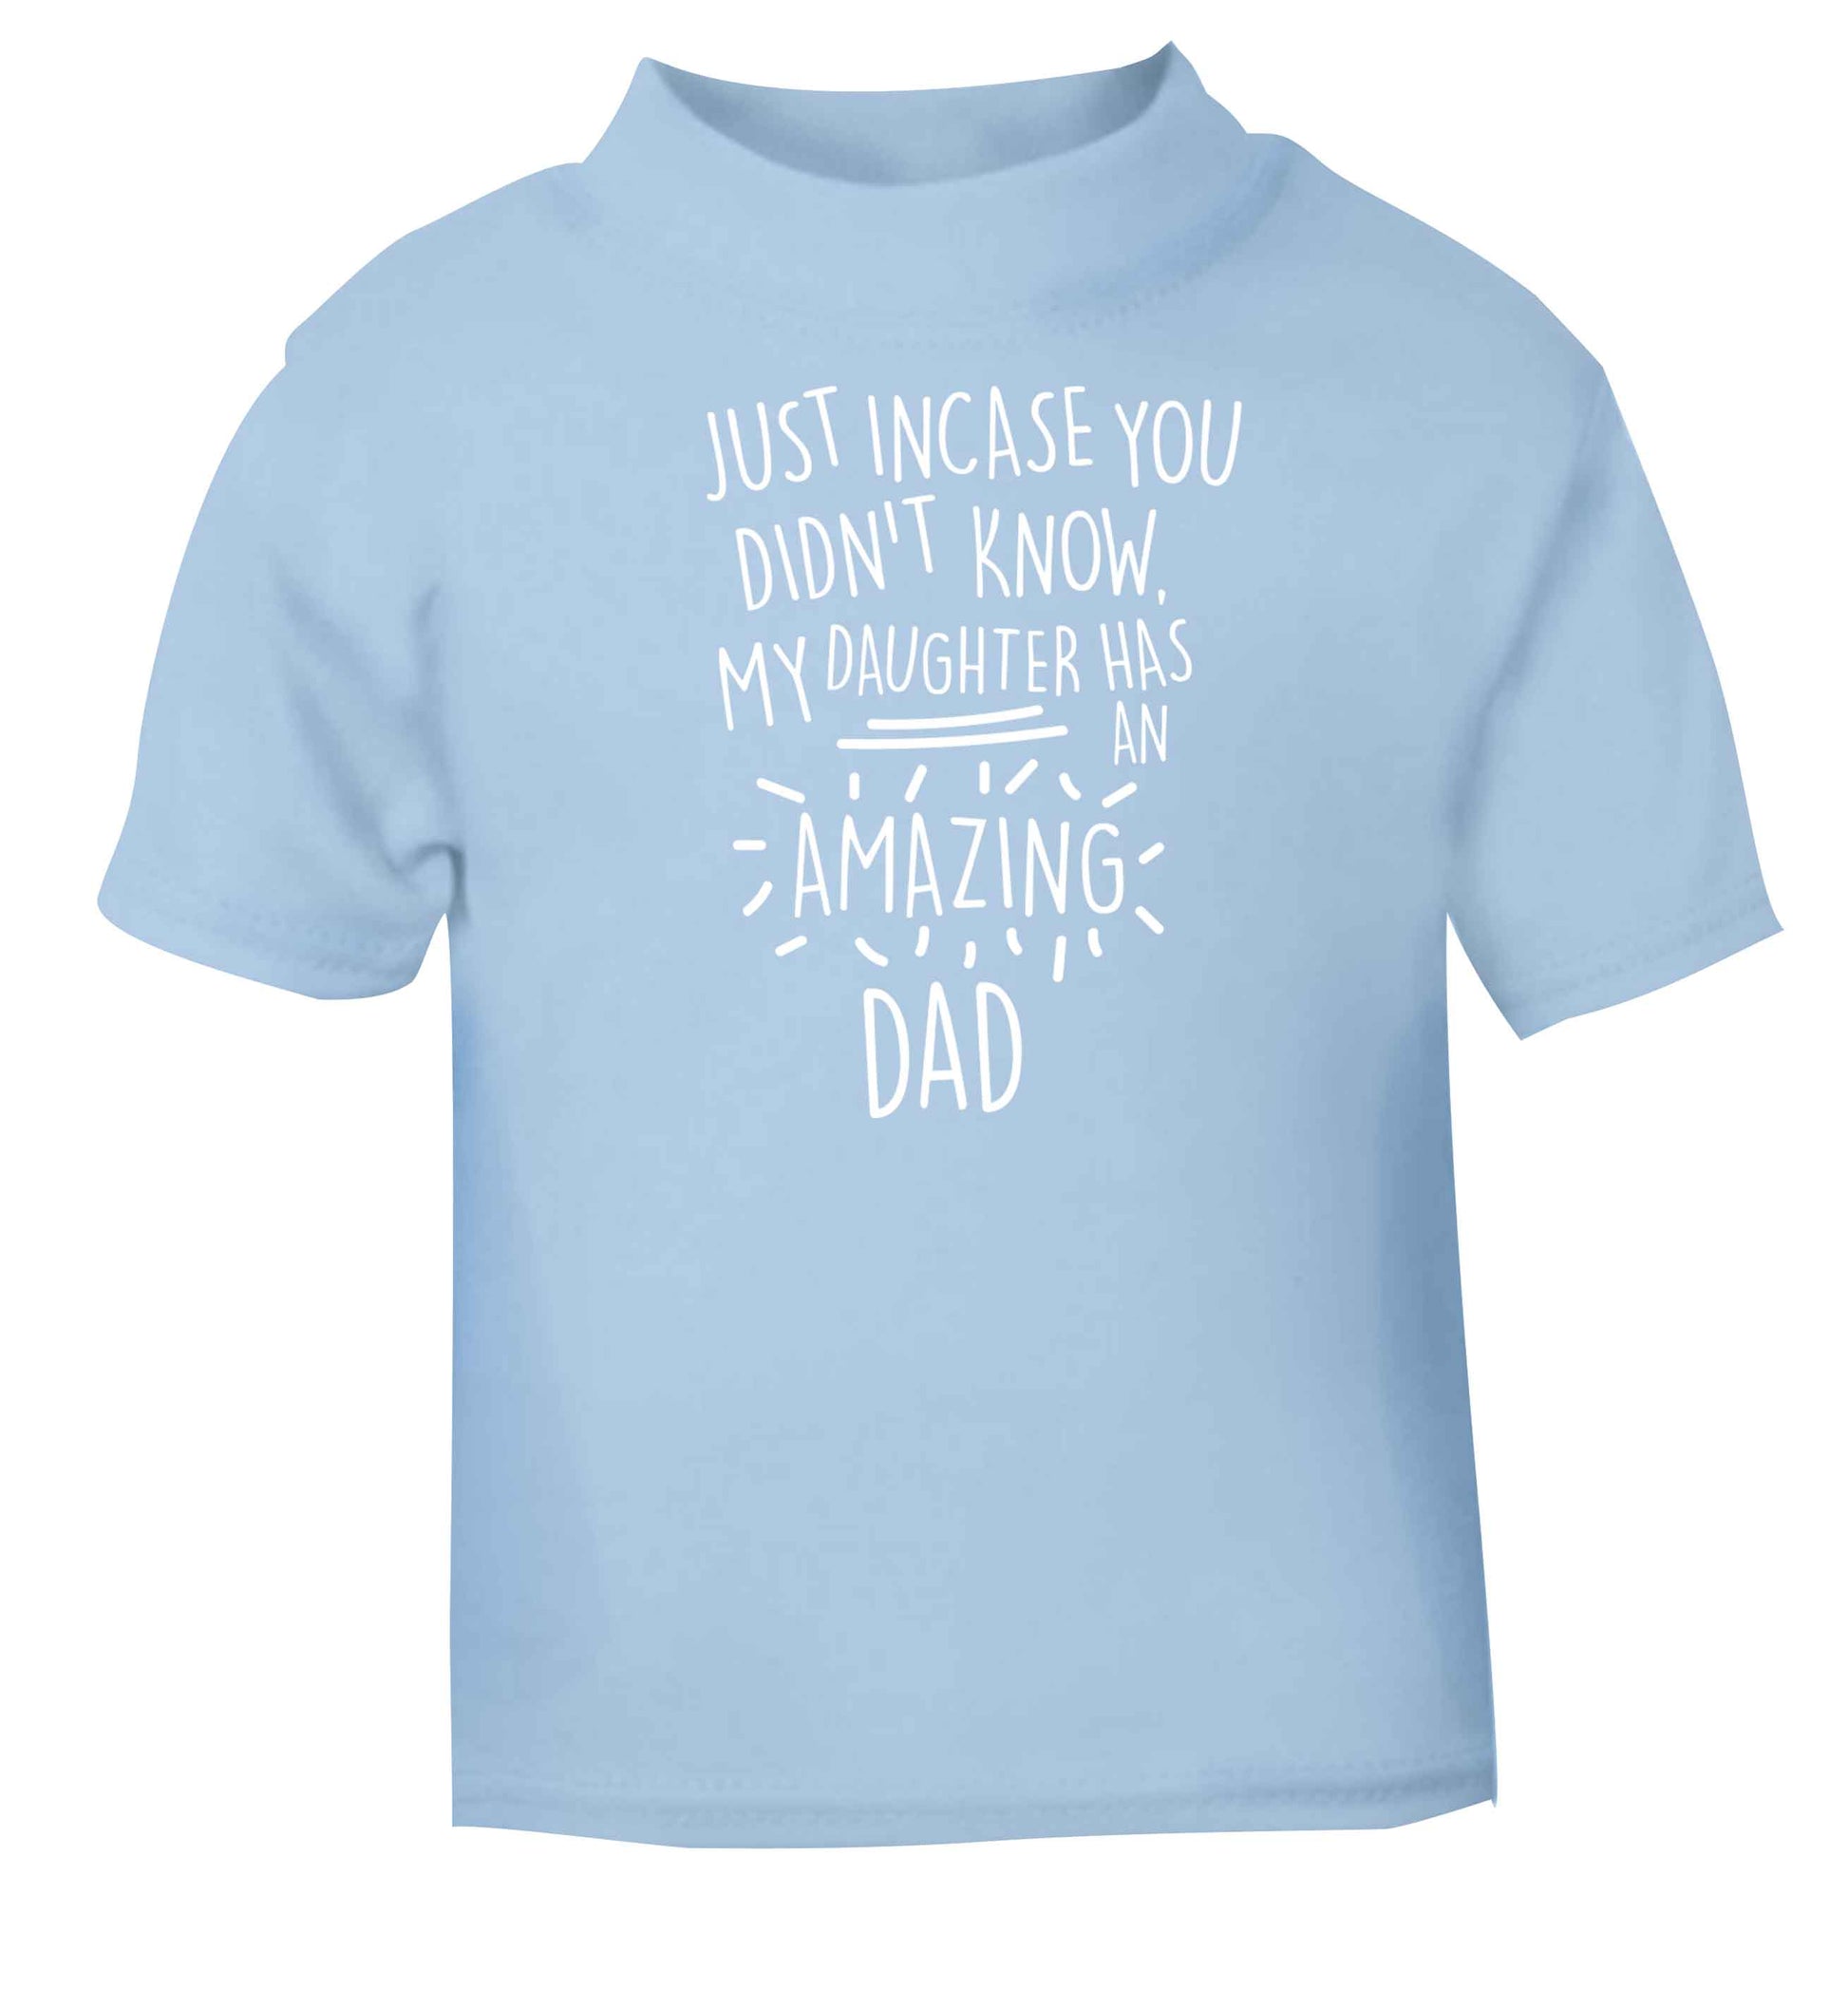 Just incase you didn't know my daughter has an amazing dad light blue baby toddler Tshirt 2 Years